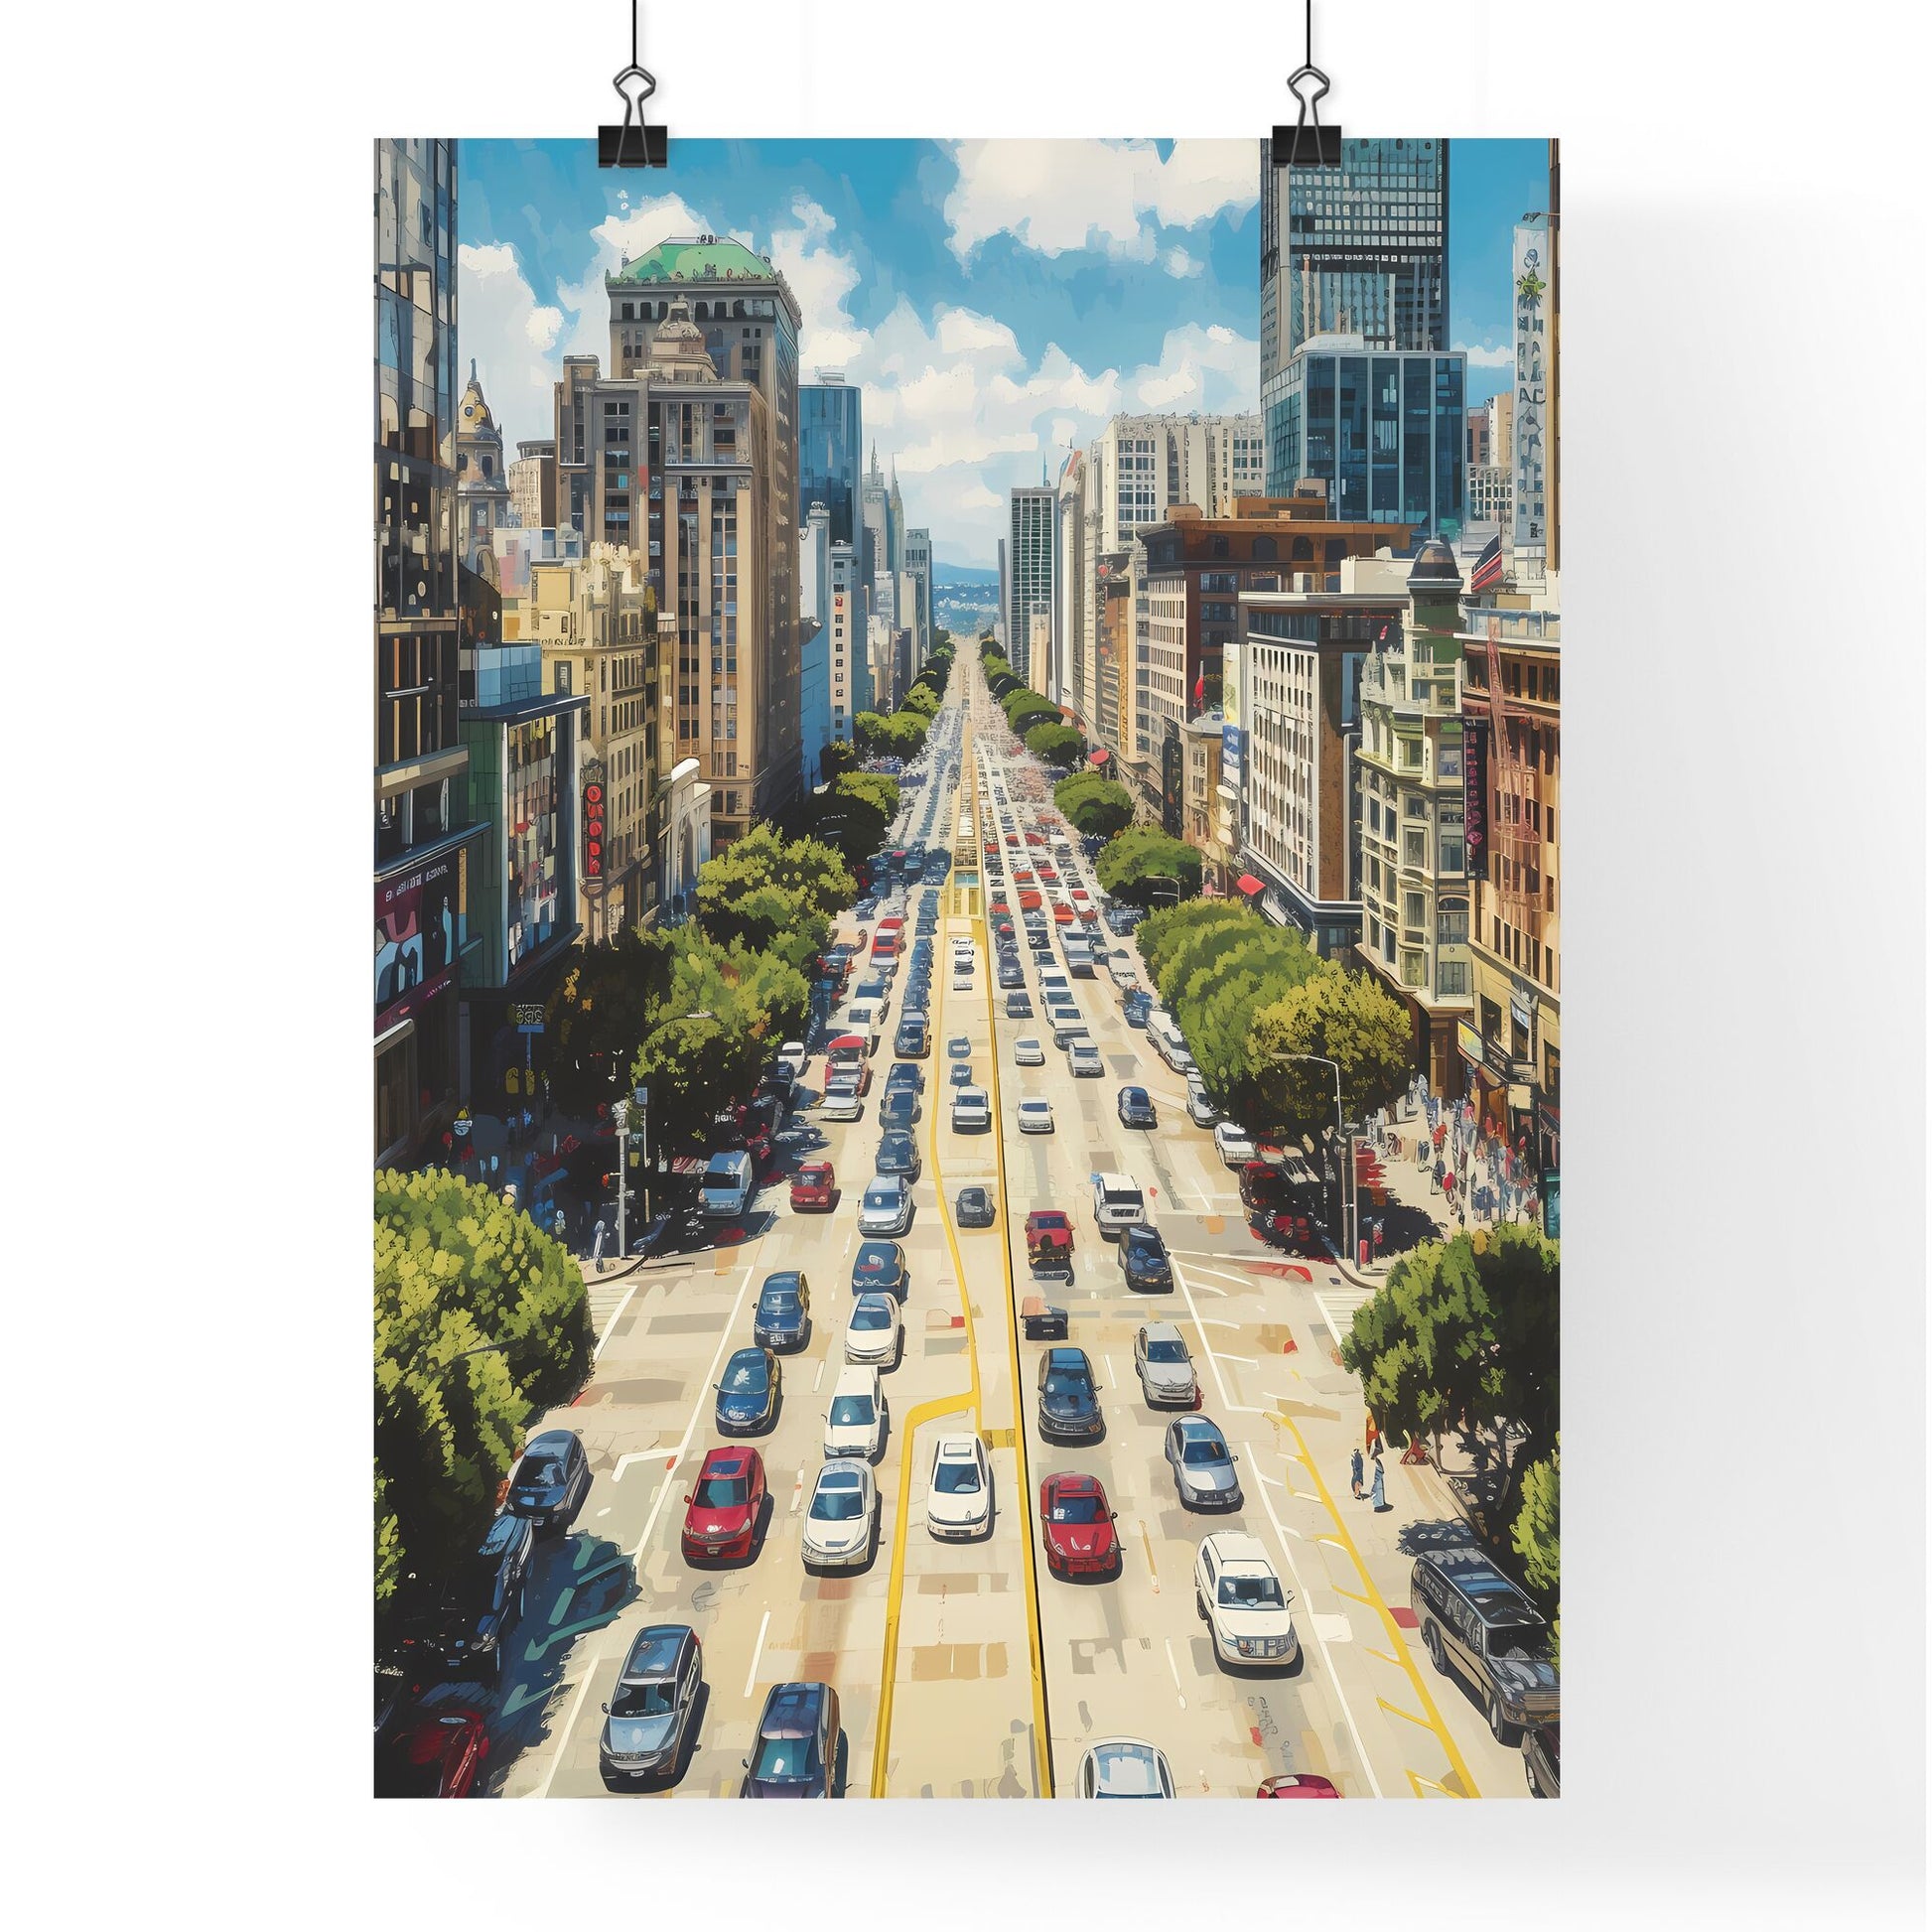 Poster of San Francisco - Art print of a city street with many cars and buildings Default Title